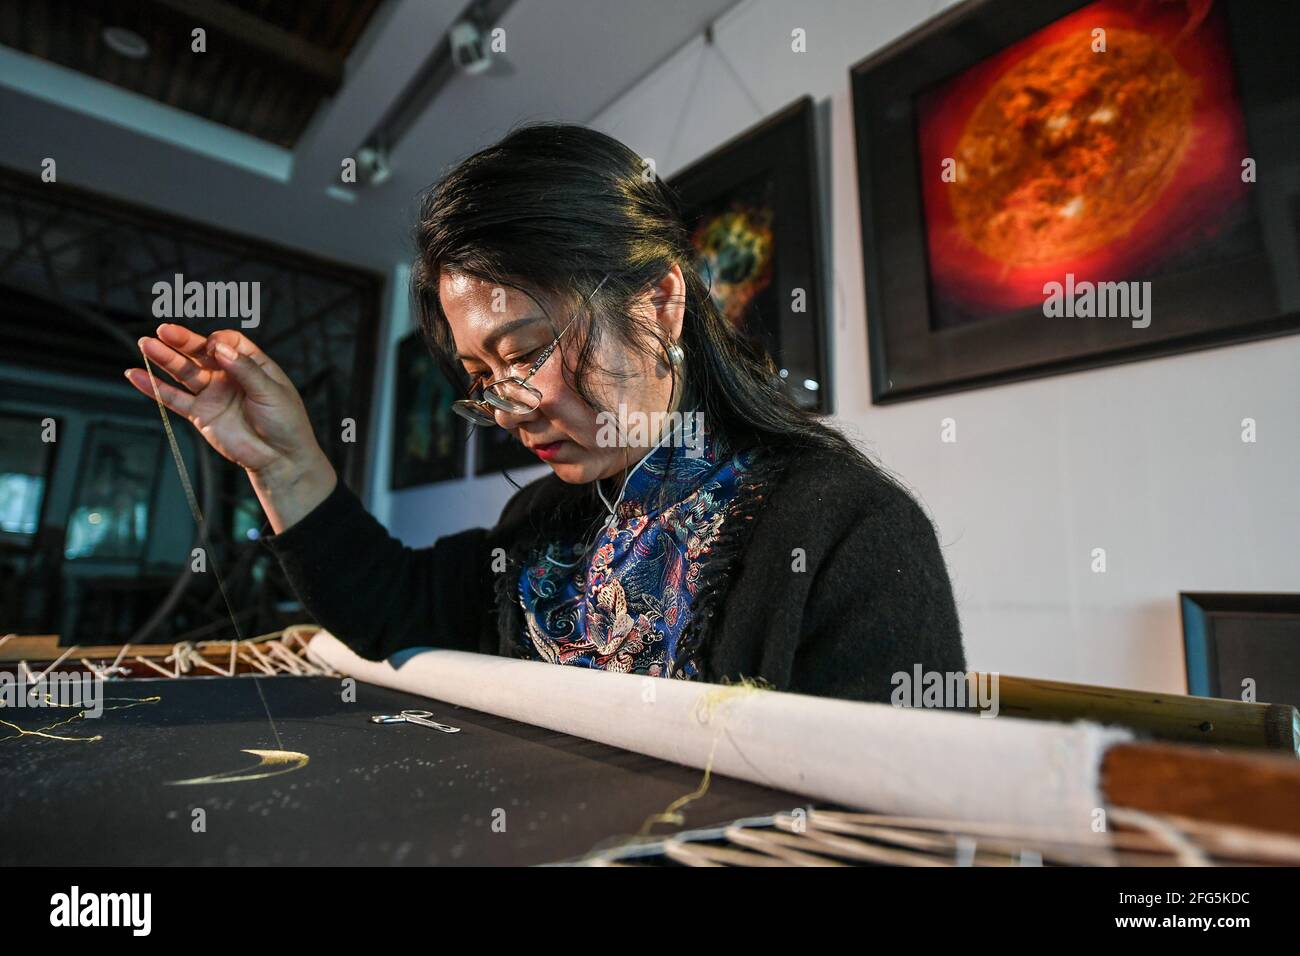 (210425) -- SUZHOU, April 25, 2021 (Xinhua) -- Chen Yinghua embroiders at her Suzhou Embroidery studio in Suzhou, east China's Jiangsu Province, April 14, 2021. Chen Yinghua, an embroidery artist, has brought her own 'universe' created with needles and silk threads, to the opening ceremony of the Space Day of China held here on Saturday. Based in Suzhou, a city with time-honored embroidery arts in east China's Jiangsu Province, Chen's studio outshines its peers with a series of cosmos-themed artworks. The dreamy celestial bodies in her studio are skillfully knitted with the help of multip Stock Photo